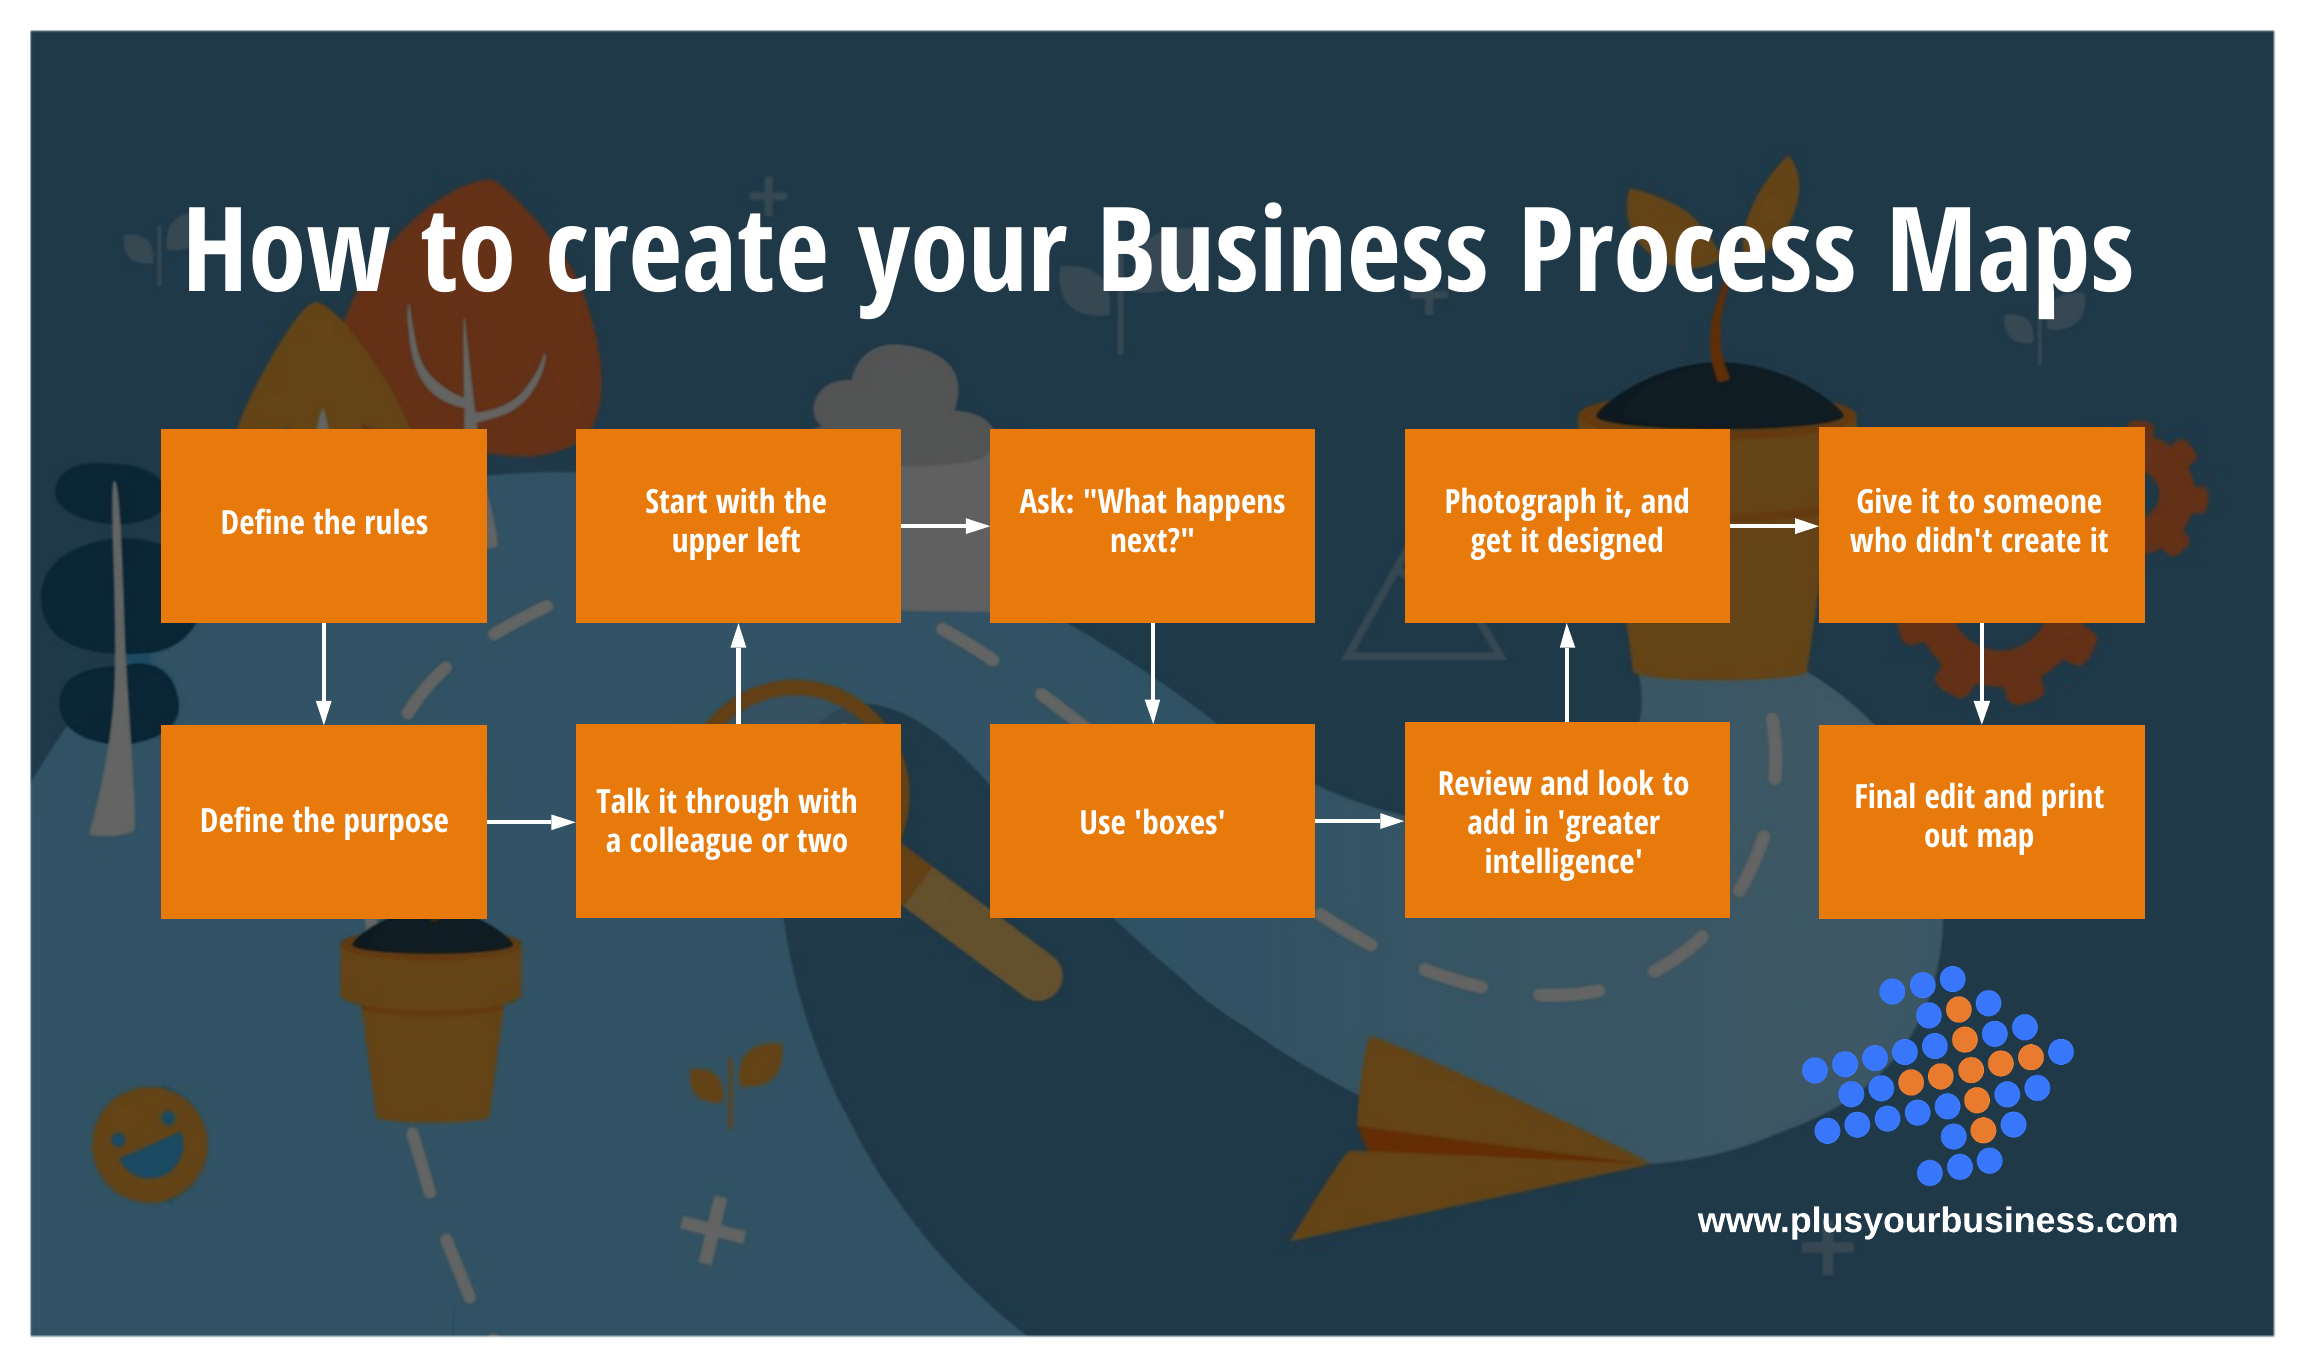 How To Create Your Business Process Maps (1) #keepProtocol